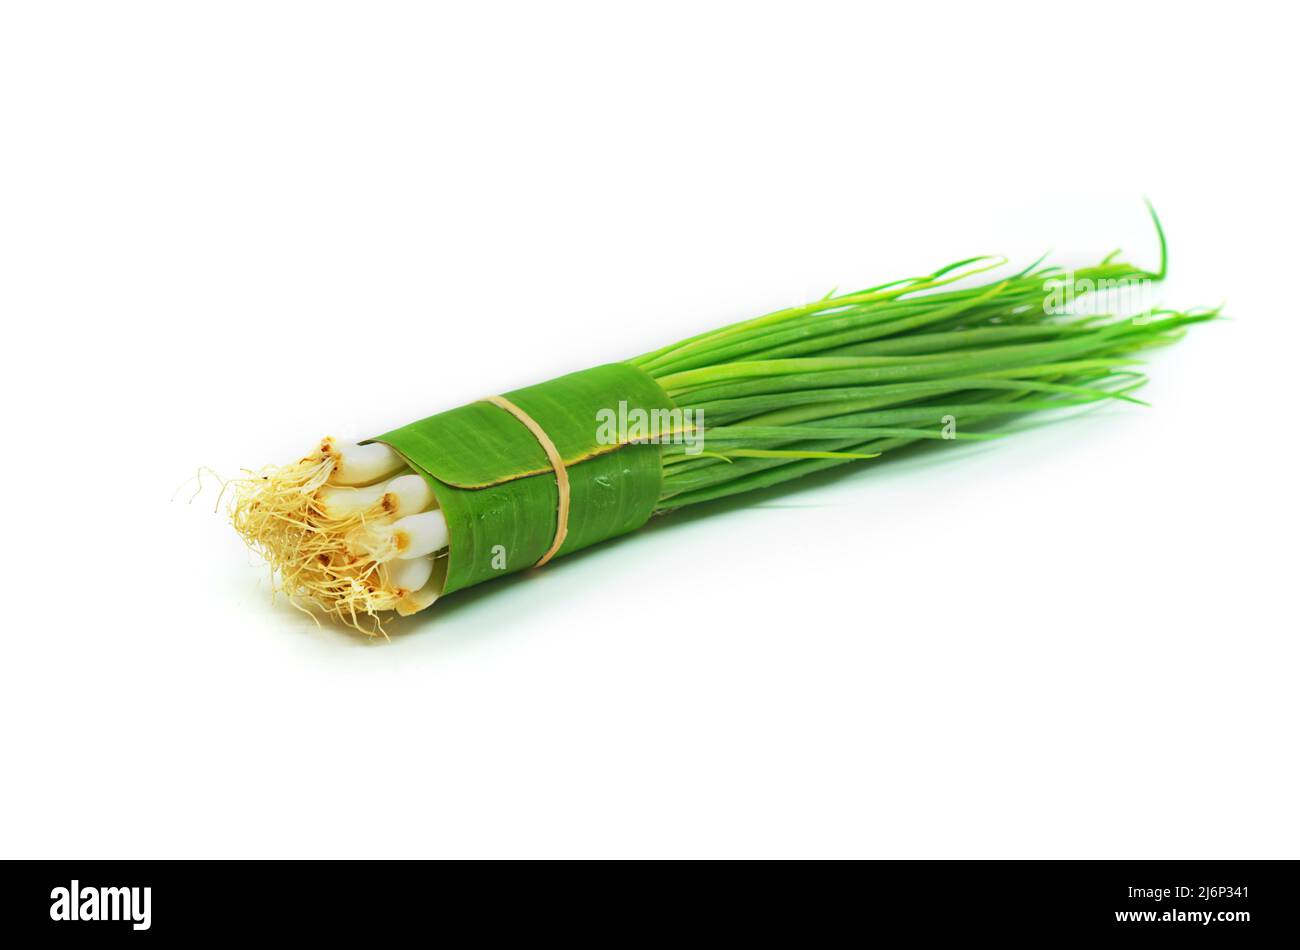 Isolated pack of fresh spring onions or scallions on white background, packing for sale in the concept of organic fresh vegetable, using banana leaf t Stock Photo